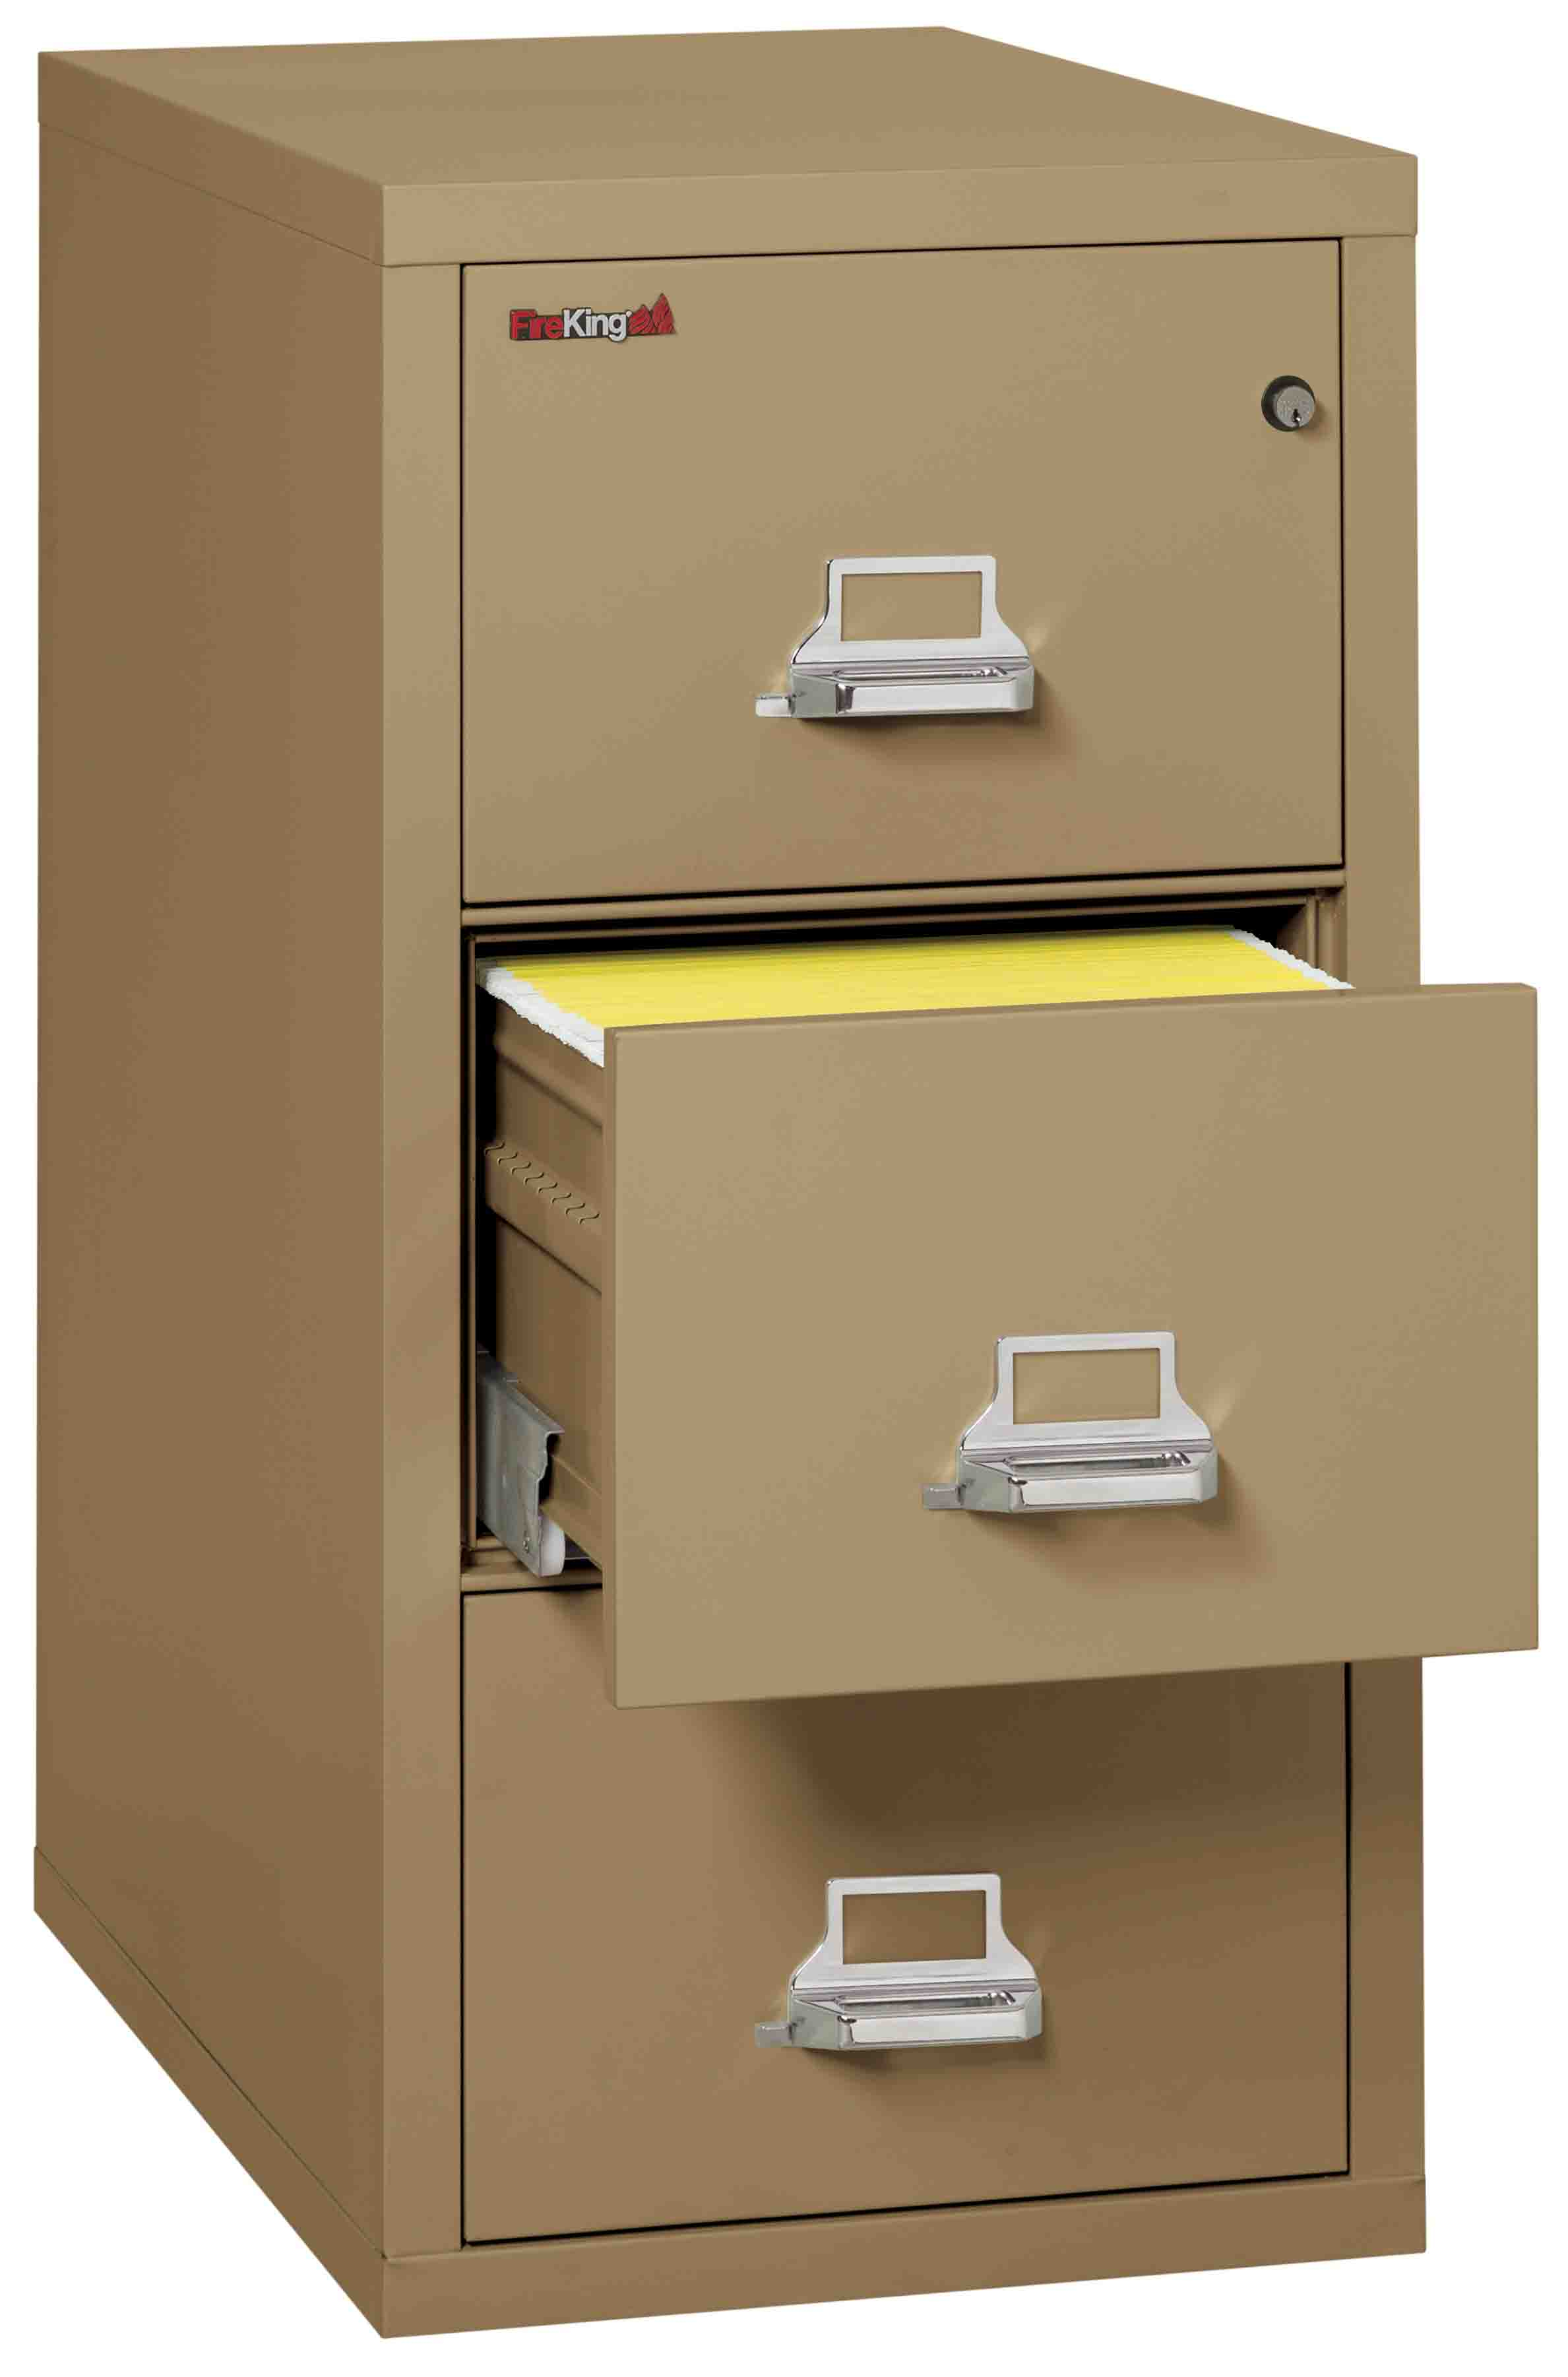 Fire King 3 2131 C Vertical Fireproof File Cabinets 3 Drawer 1 Hour with dimensions 2377 X 3603